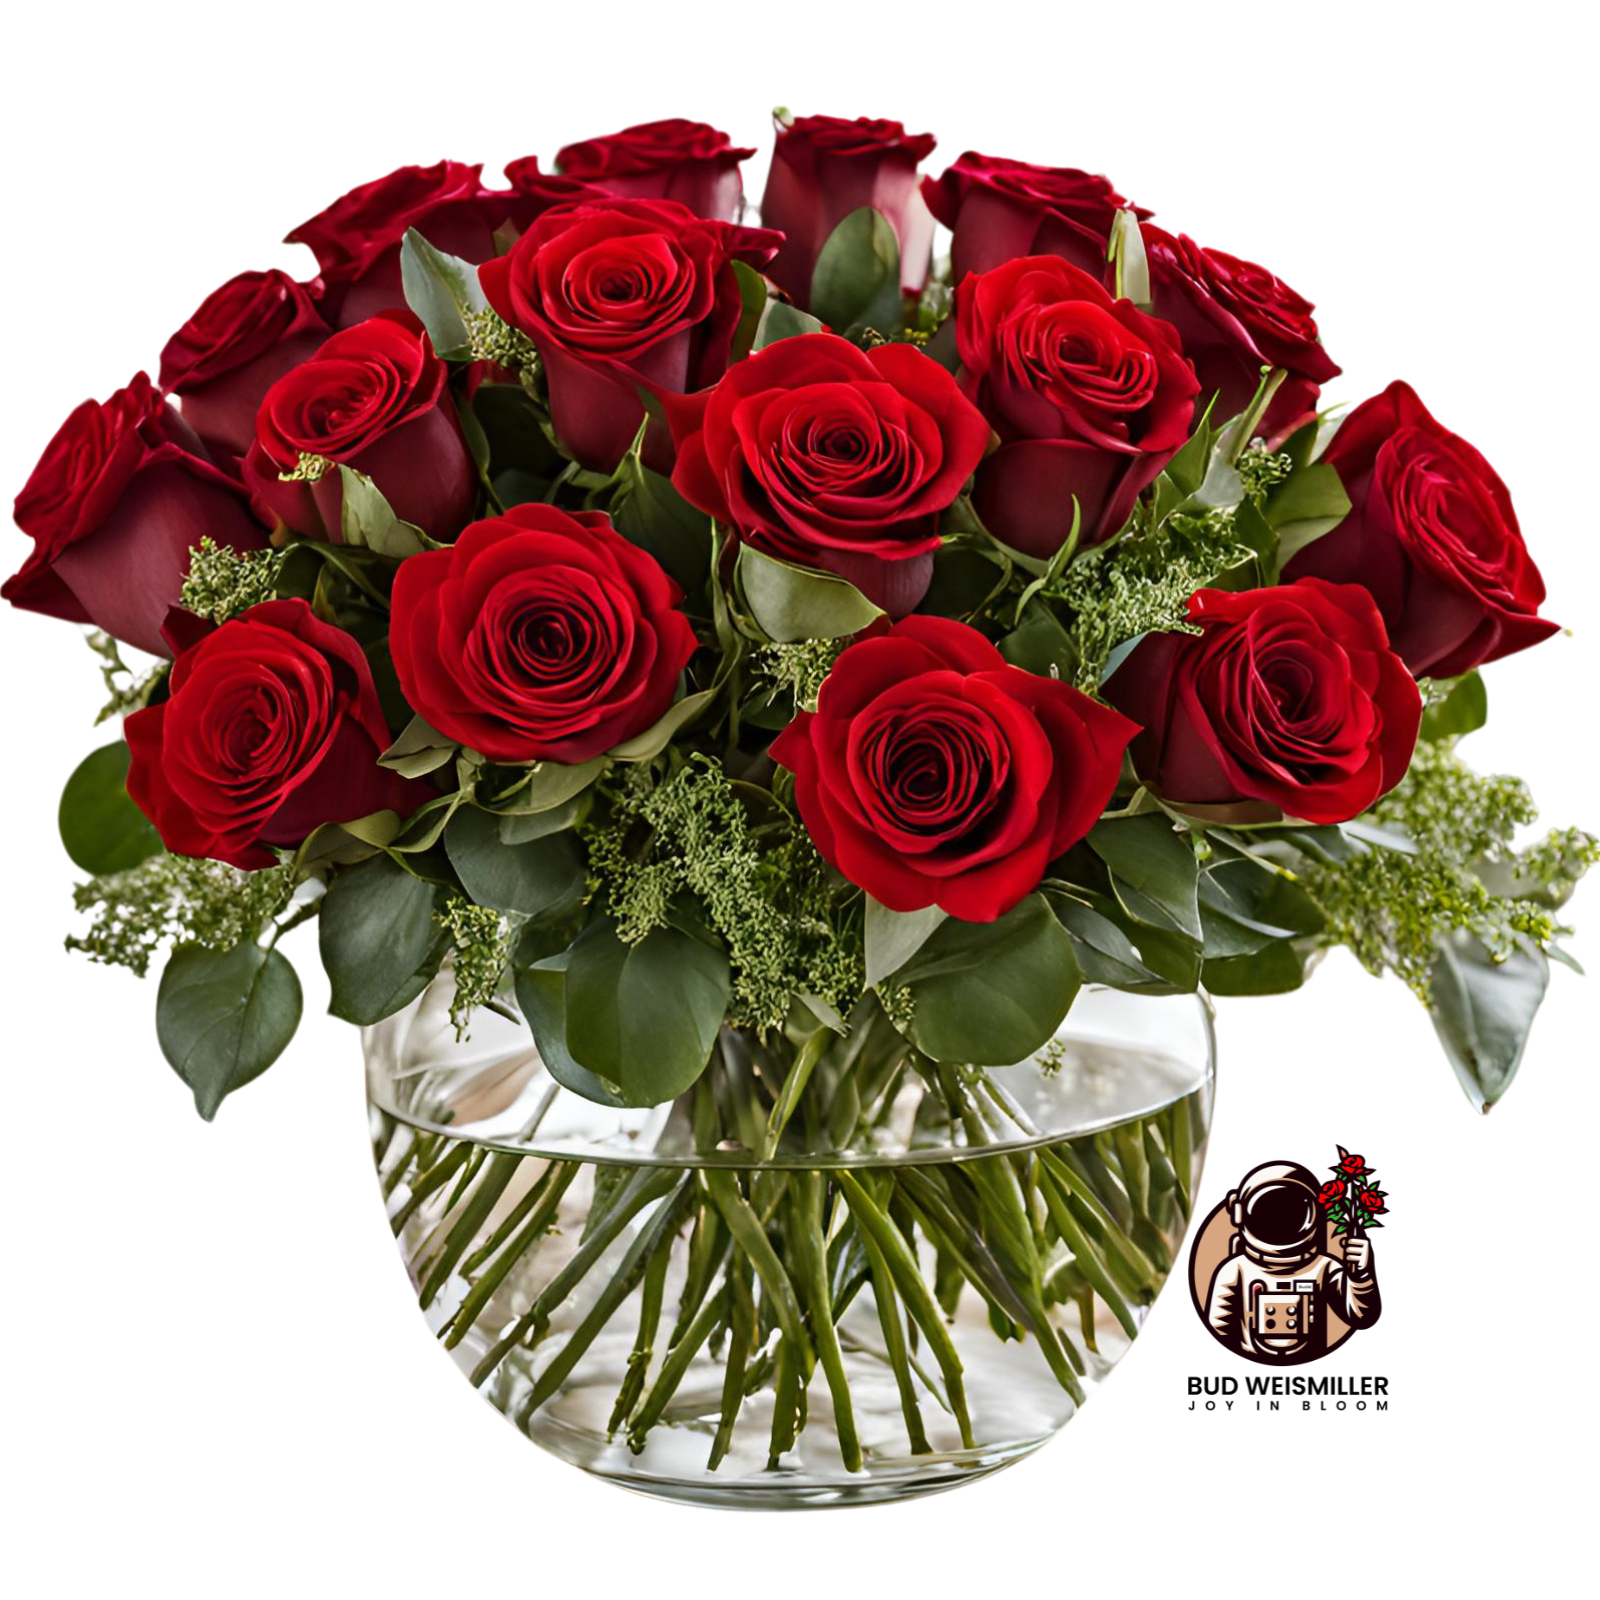 A beautiful arrangement of 18 red roses in a glass vase with greenery and filler flowers.